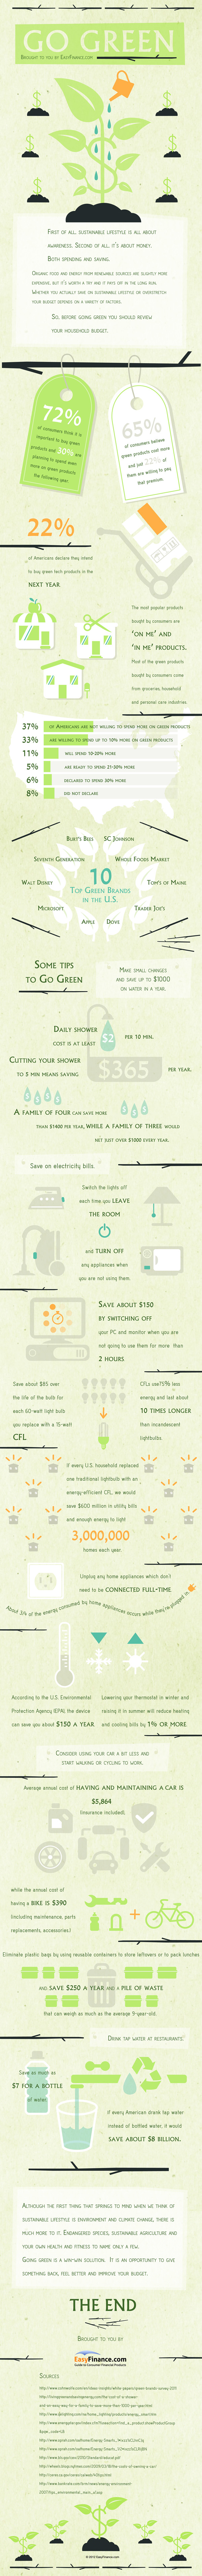 Go Green (Infographic) 